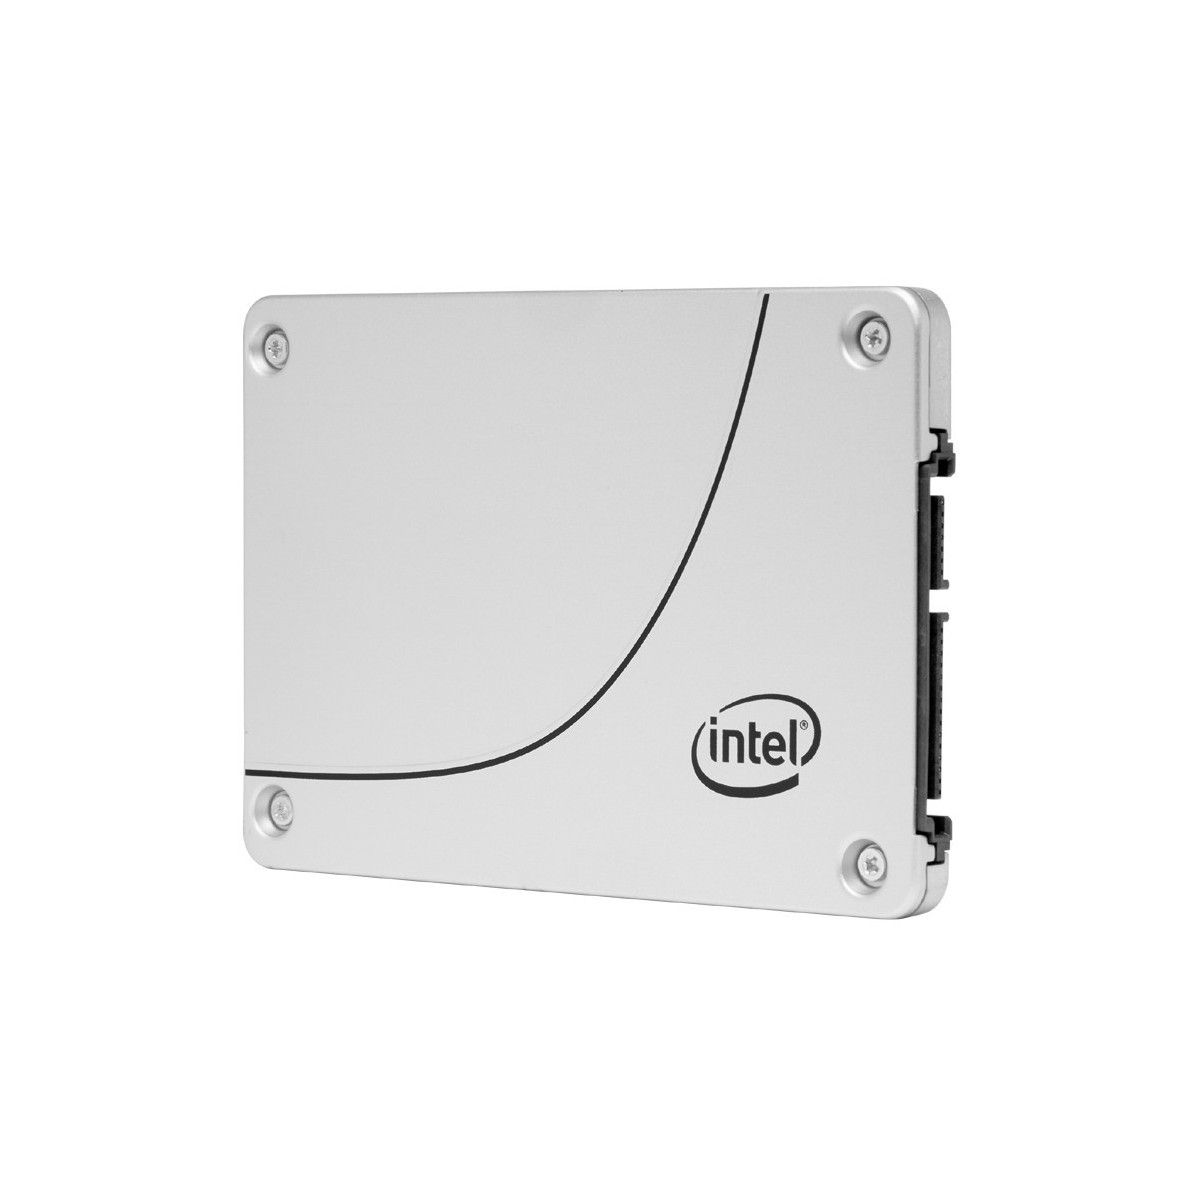 Intel Solid-State Drive DC S3520 Series 2.5 SATA 1,600 GB - Solid State Disk - Internal